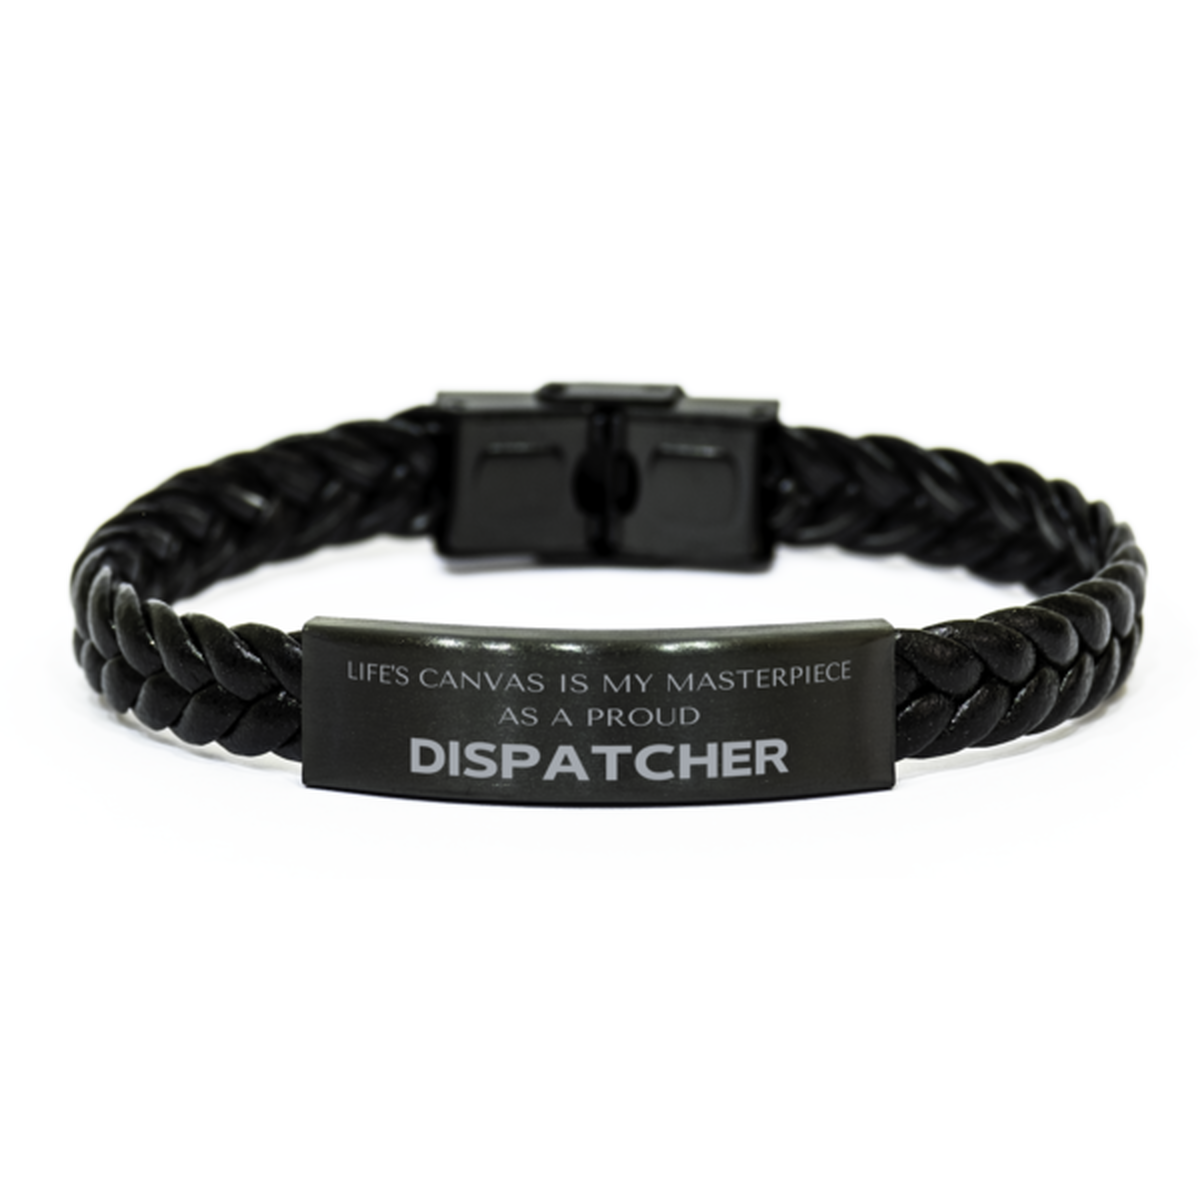 Proud Dispatcher Gifts, Life's canvas is my masterpiece, Epic Birthday Christmas Unique Braided Leather Bracelet For Dispatcher, Coworkers, Men, Women, Friends